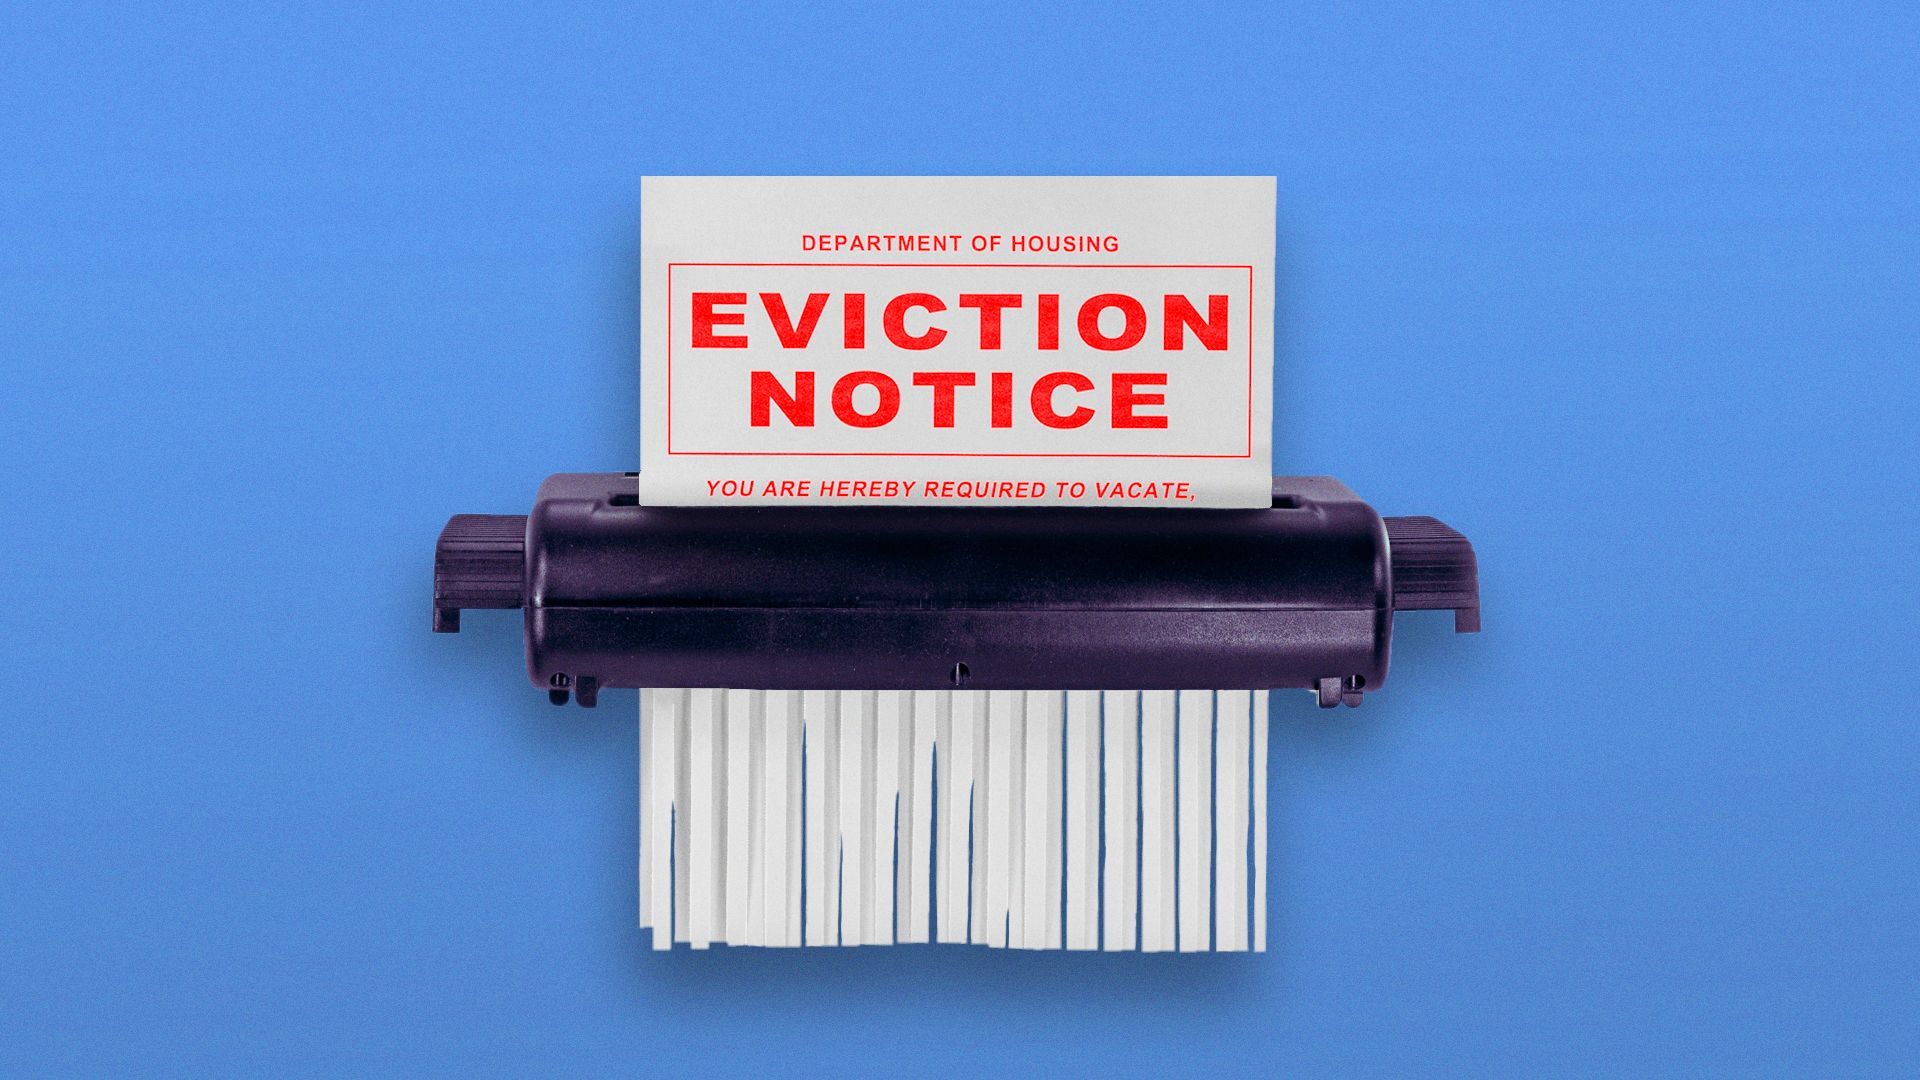 Illustration of eviction notice being shredded.